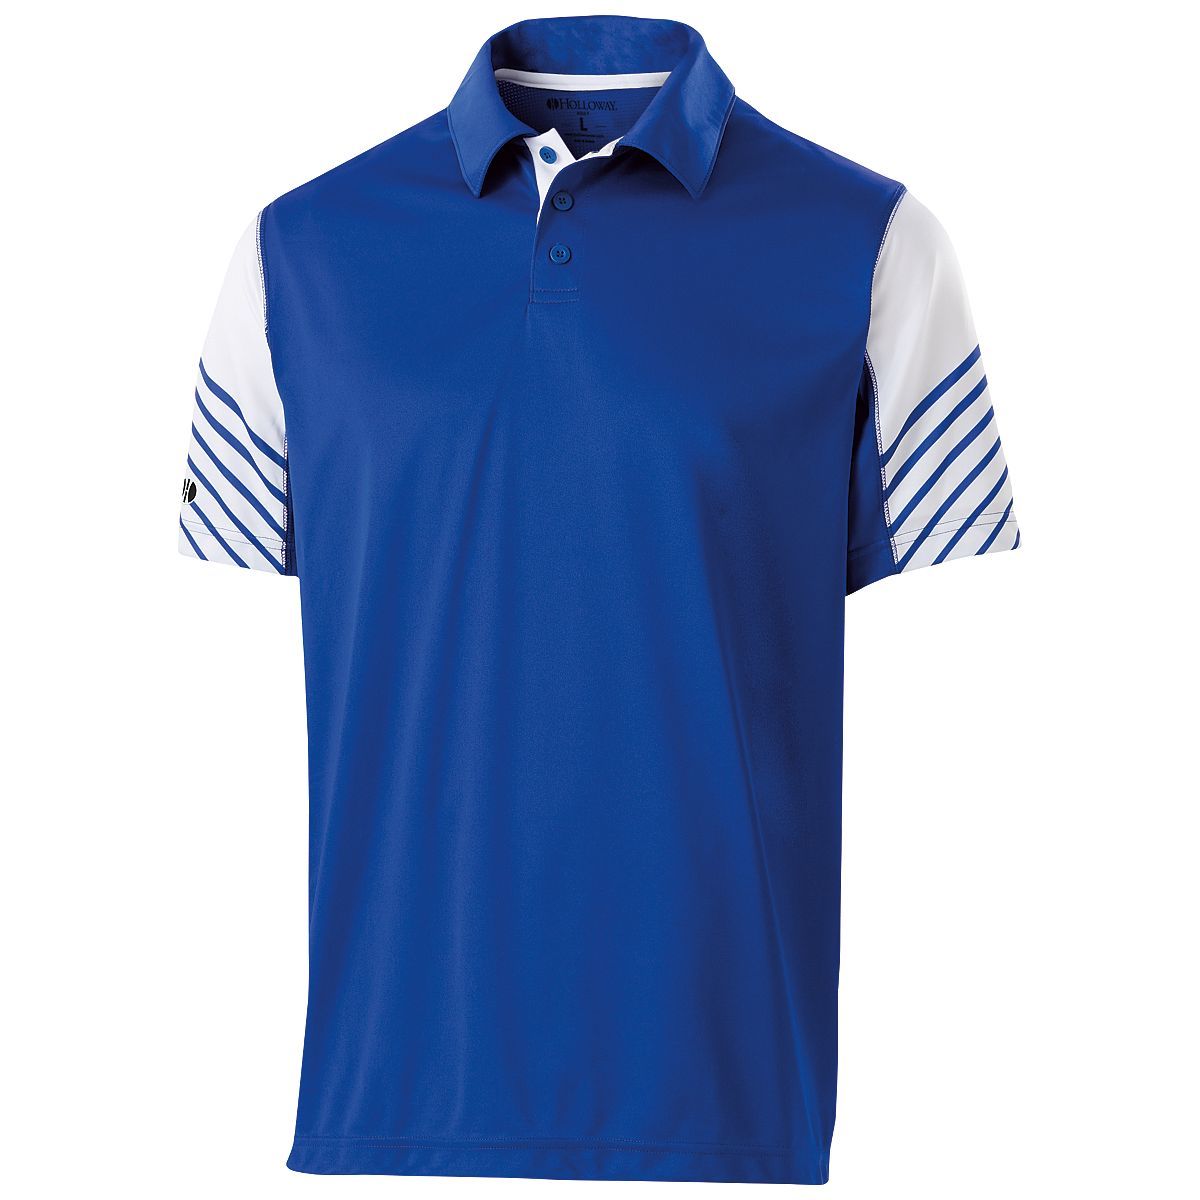 Holloway Arc Polo in Royal/White  -Part of the Adult, Adult-Polos, Polos, Holloway, Shirts product lines at KanaleyCreations.com